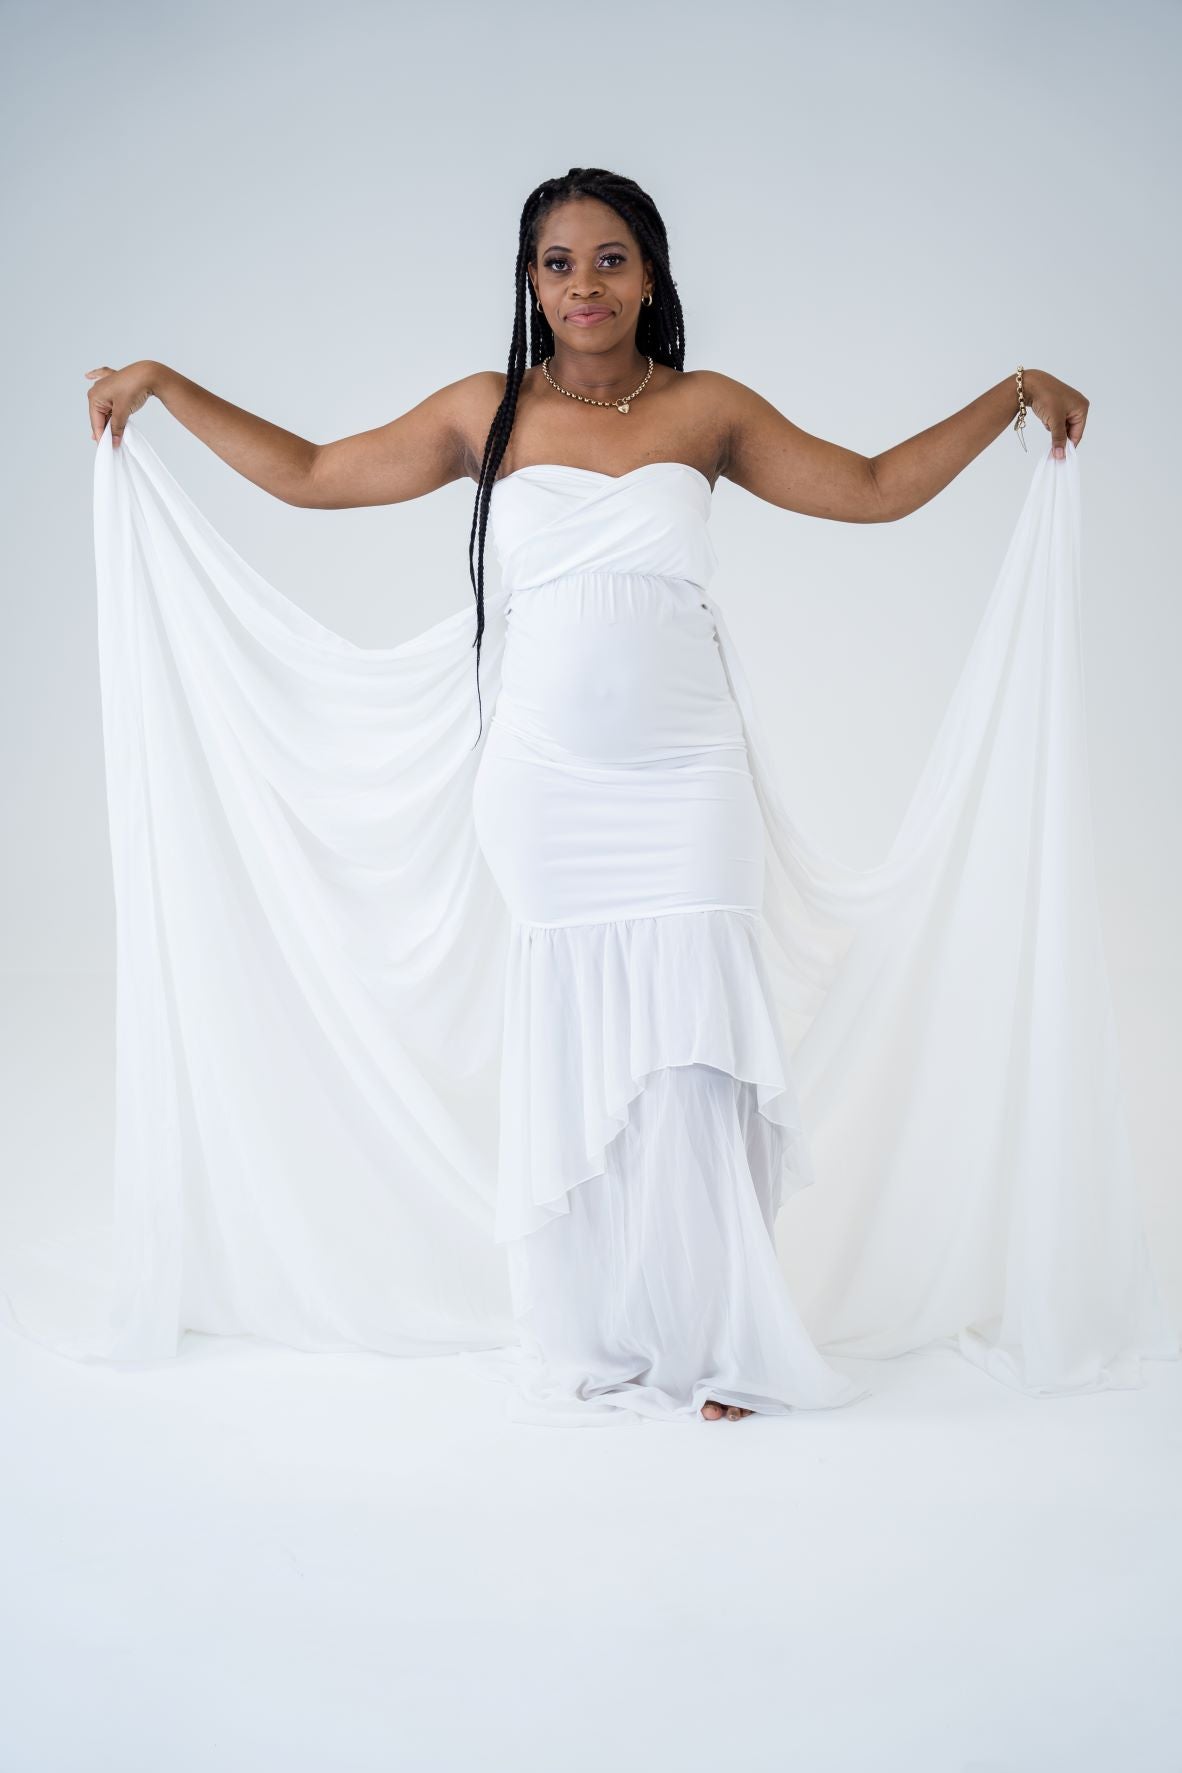 Maternity Photoshoot Dresses - Flow - White Tulle Gown - 4 DAY RENTAL - Luxe Bumps AU